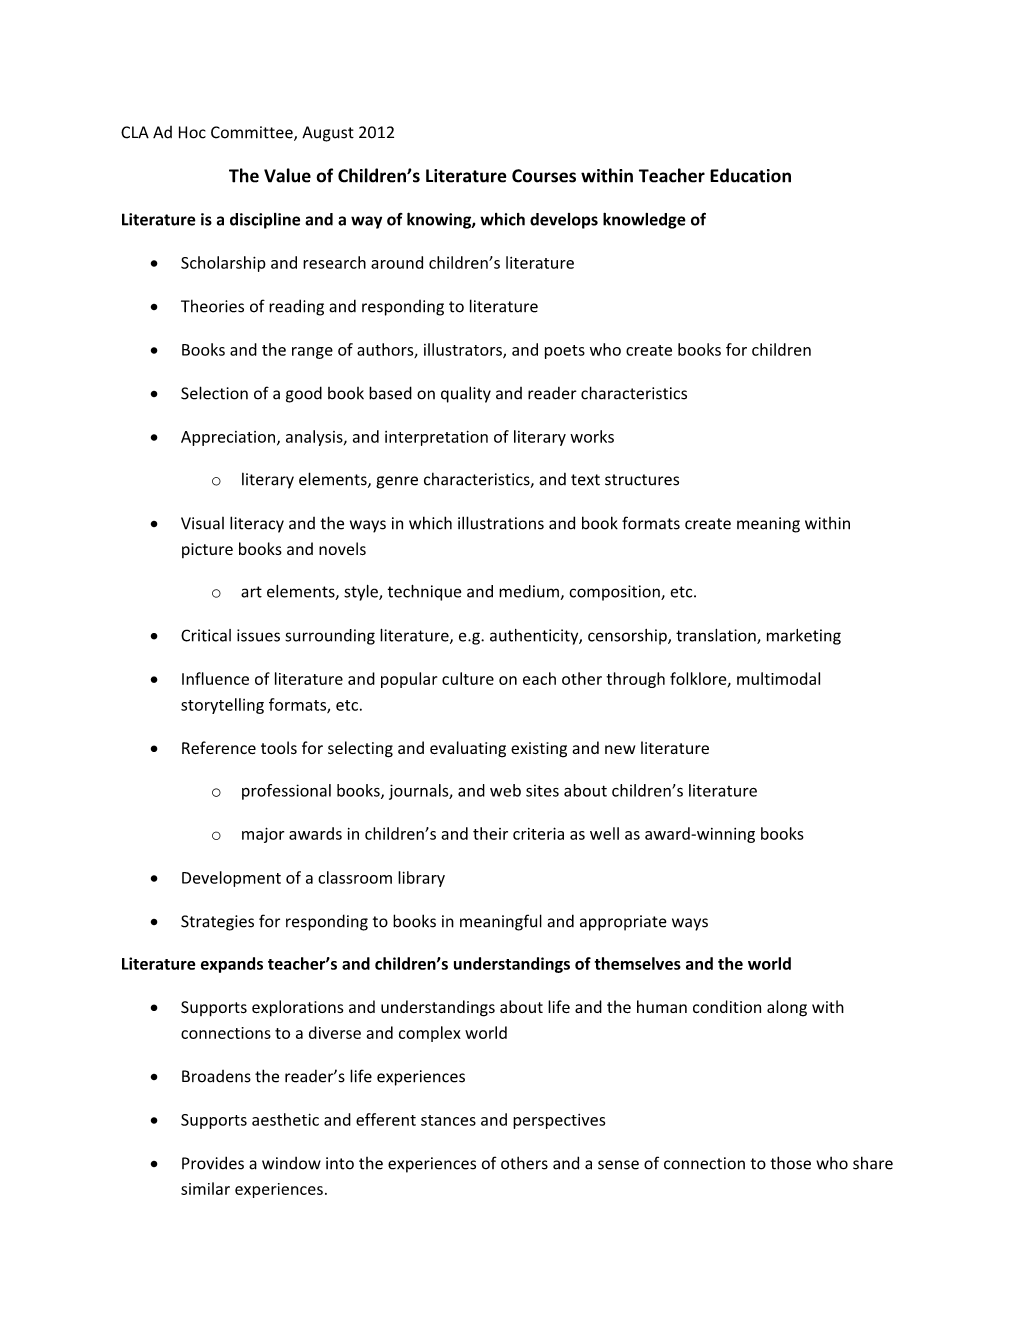 The Value of Children S Literature Courses Within Teacher Education